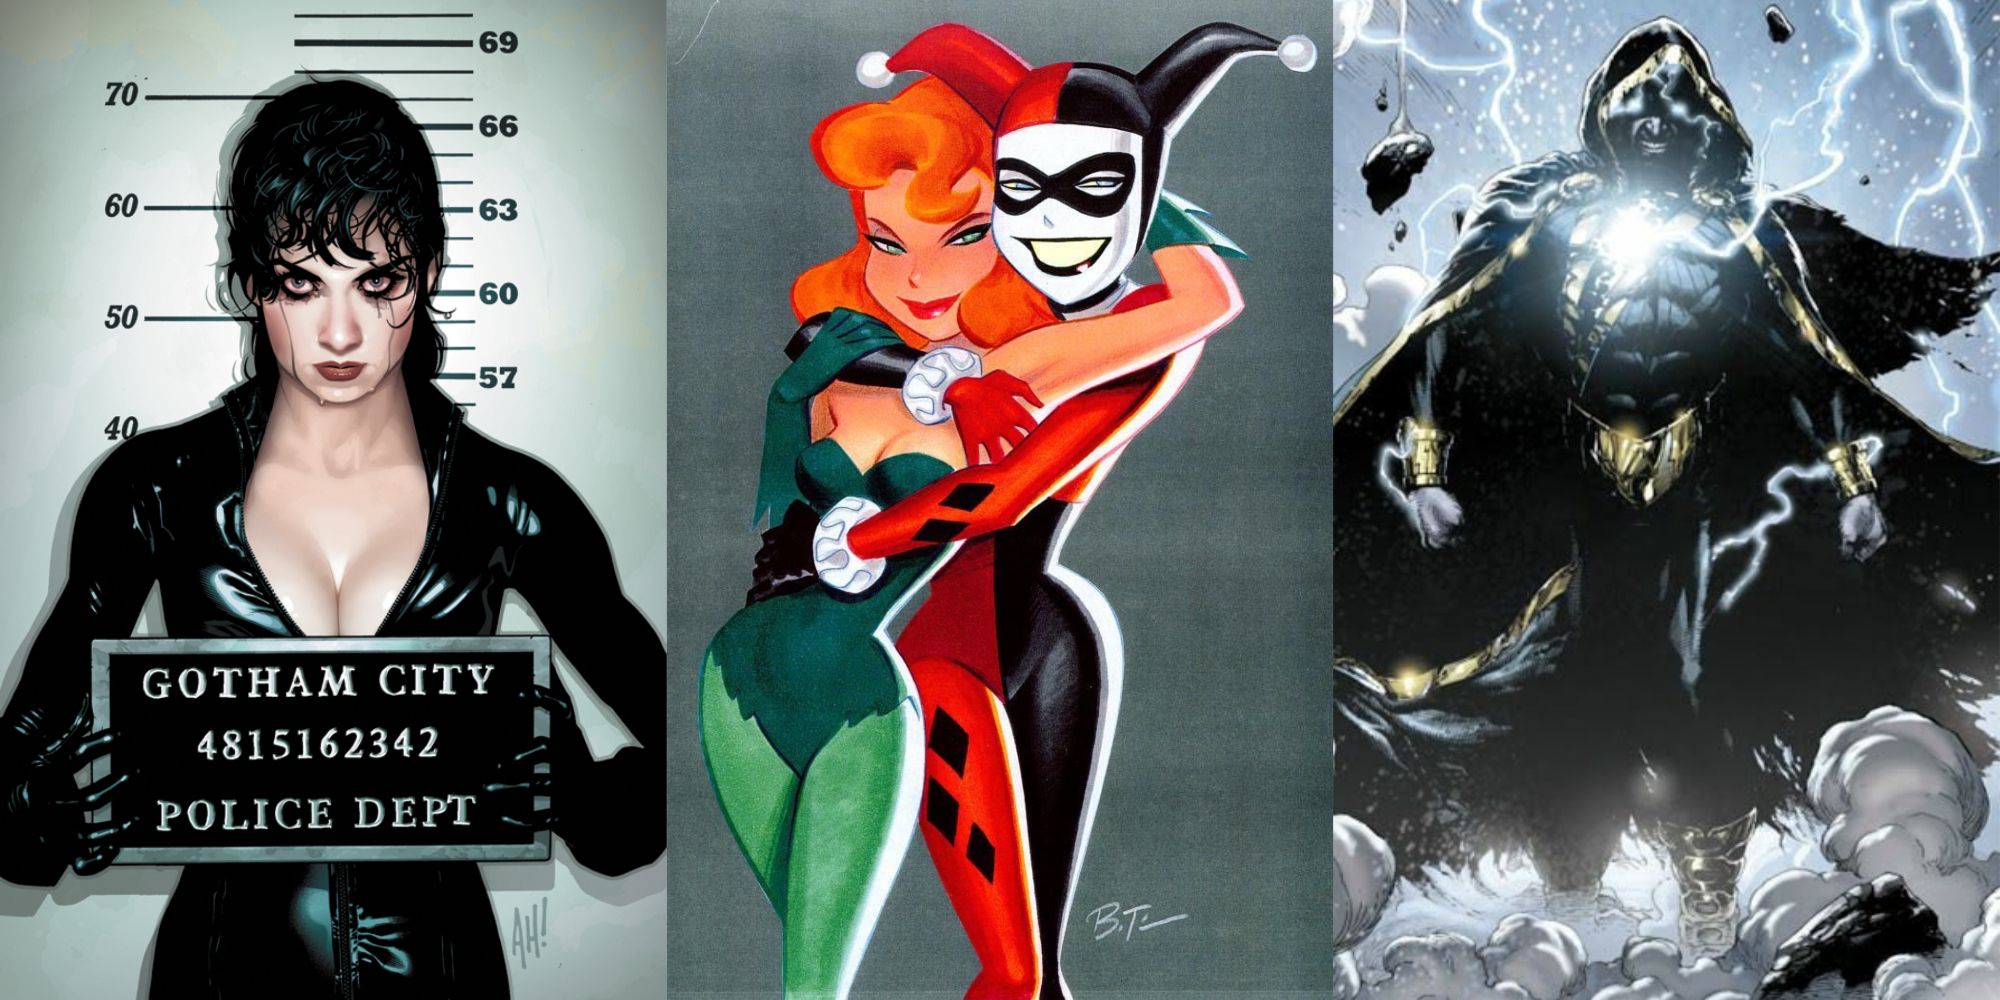 Split image of Catwoman, Harley Quinn and Poison Ivy, and Black Adam from DC Comics.